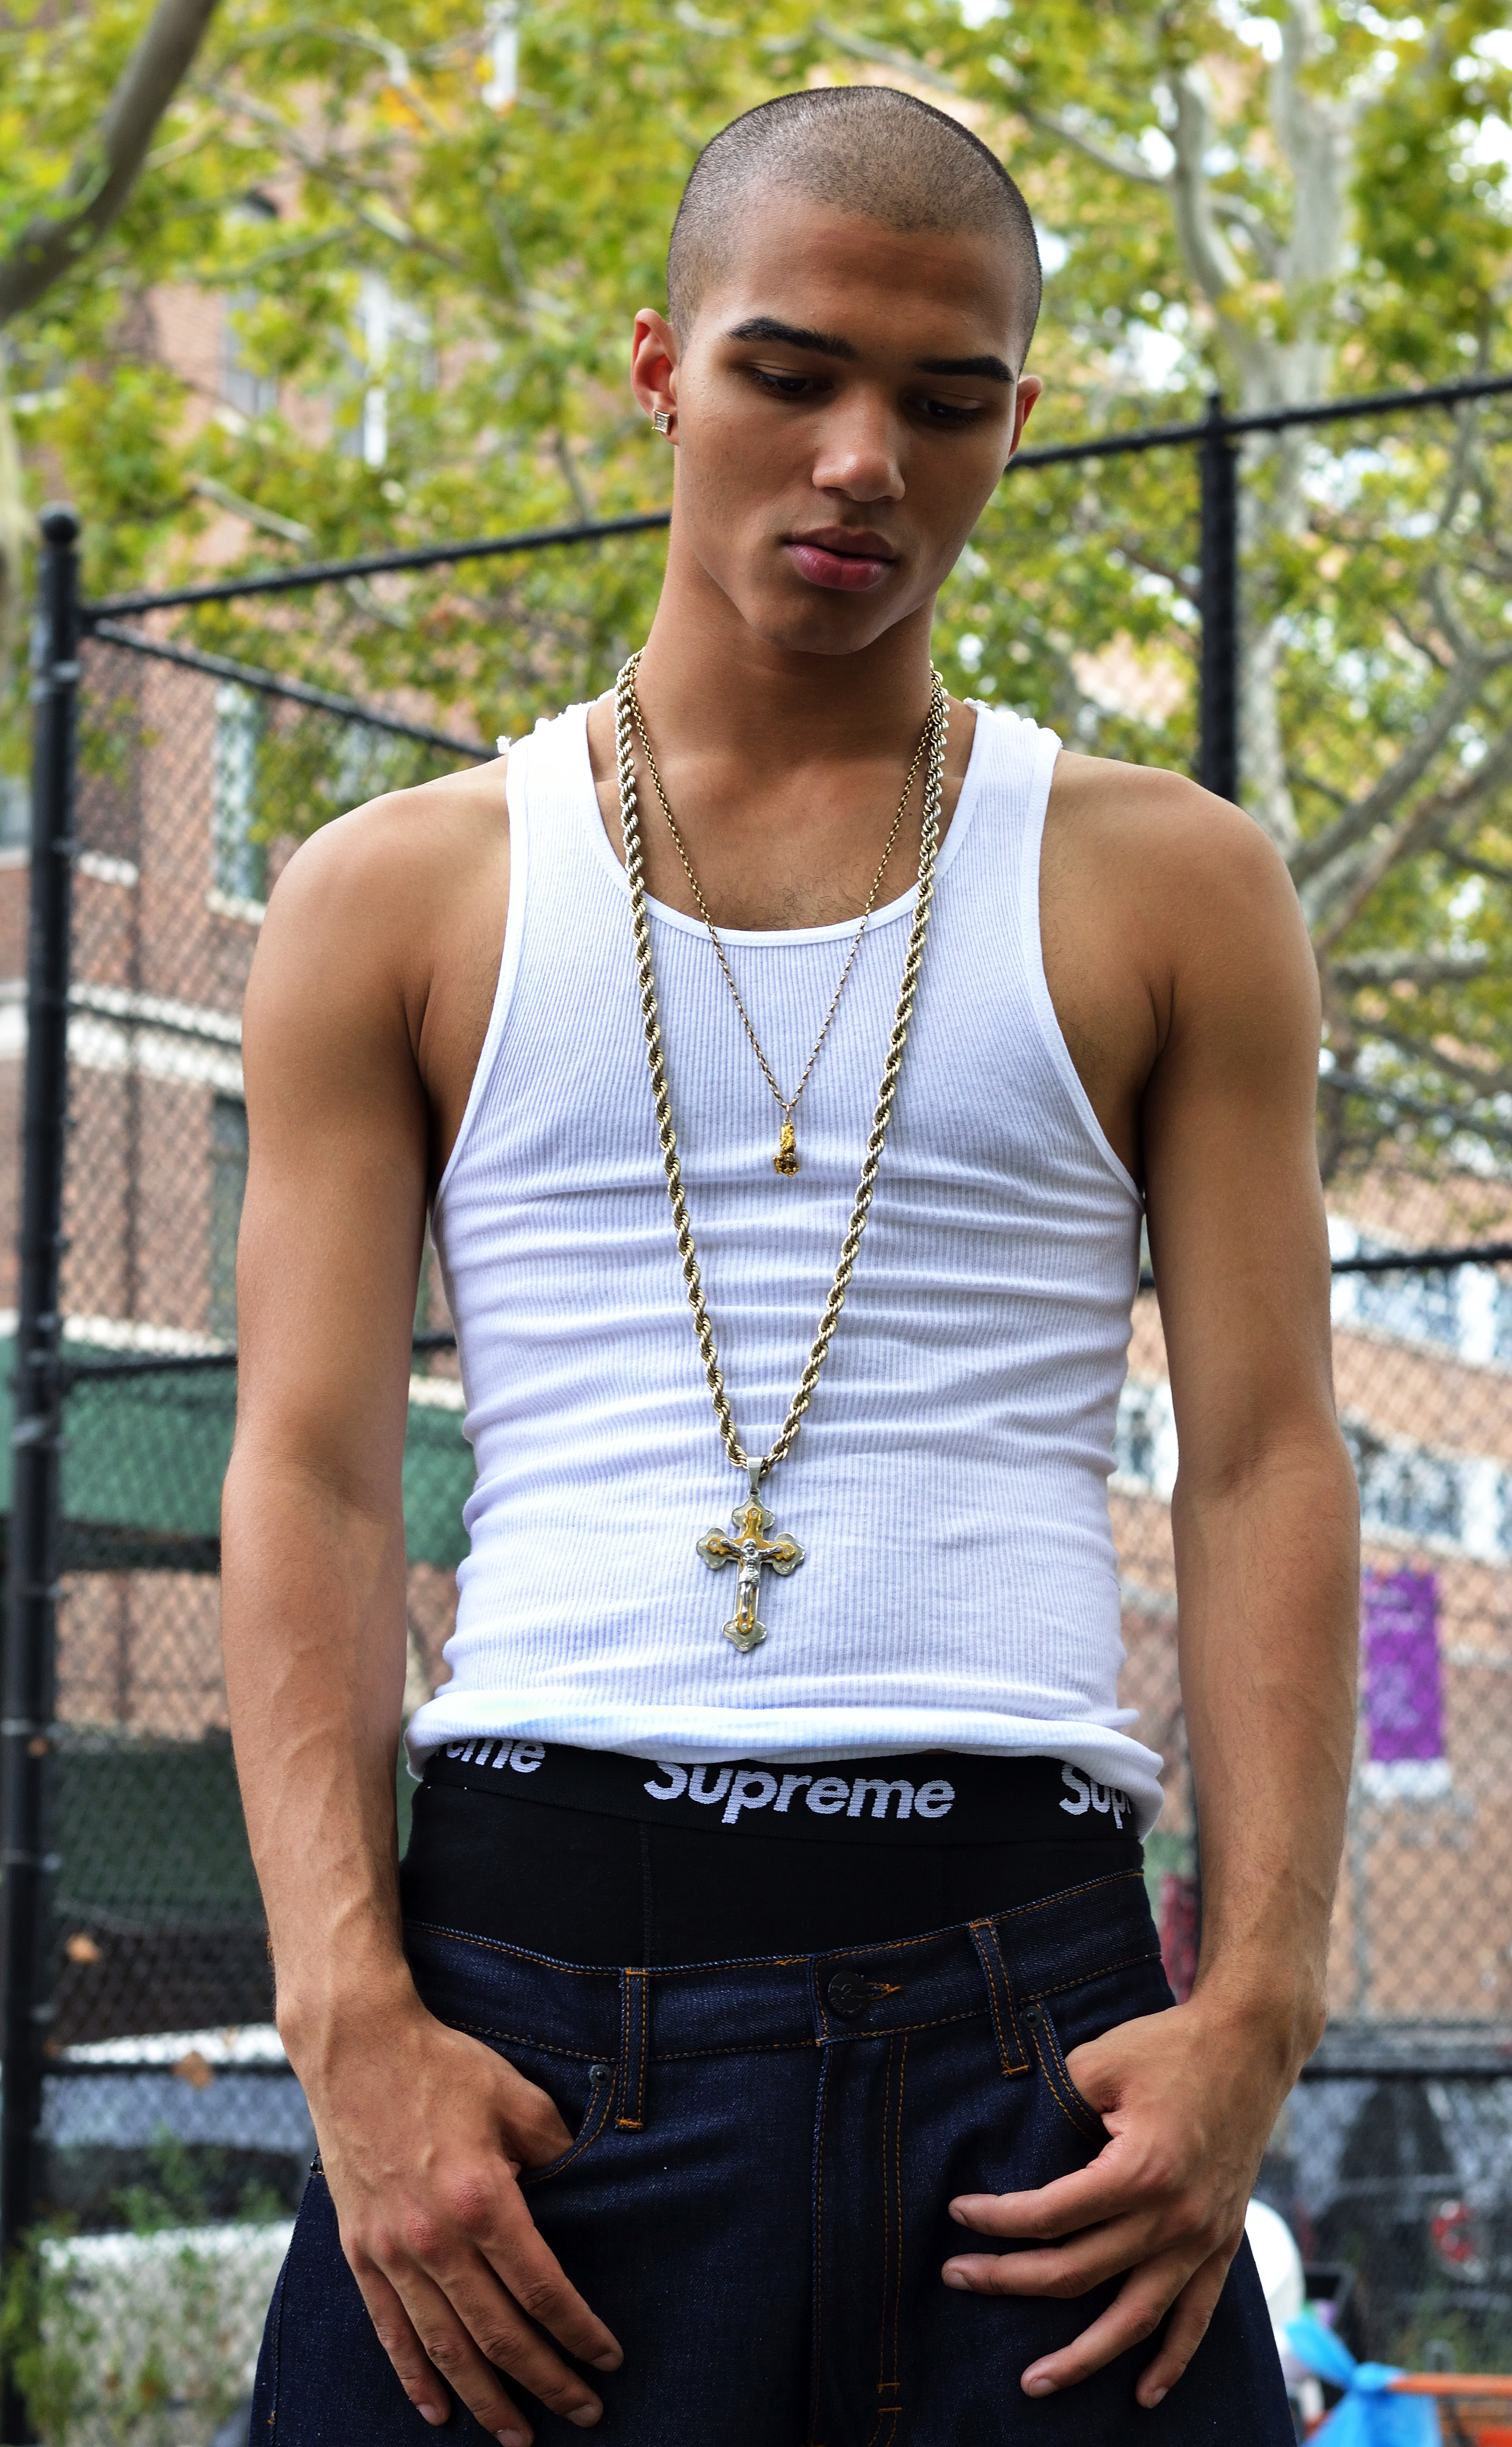 tank top HANES. briefs SUPREME. shorts ROCAWEAR. jewelry stylist’s own.